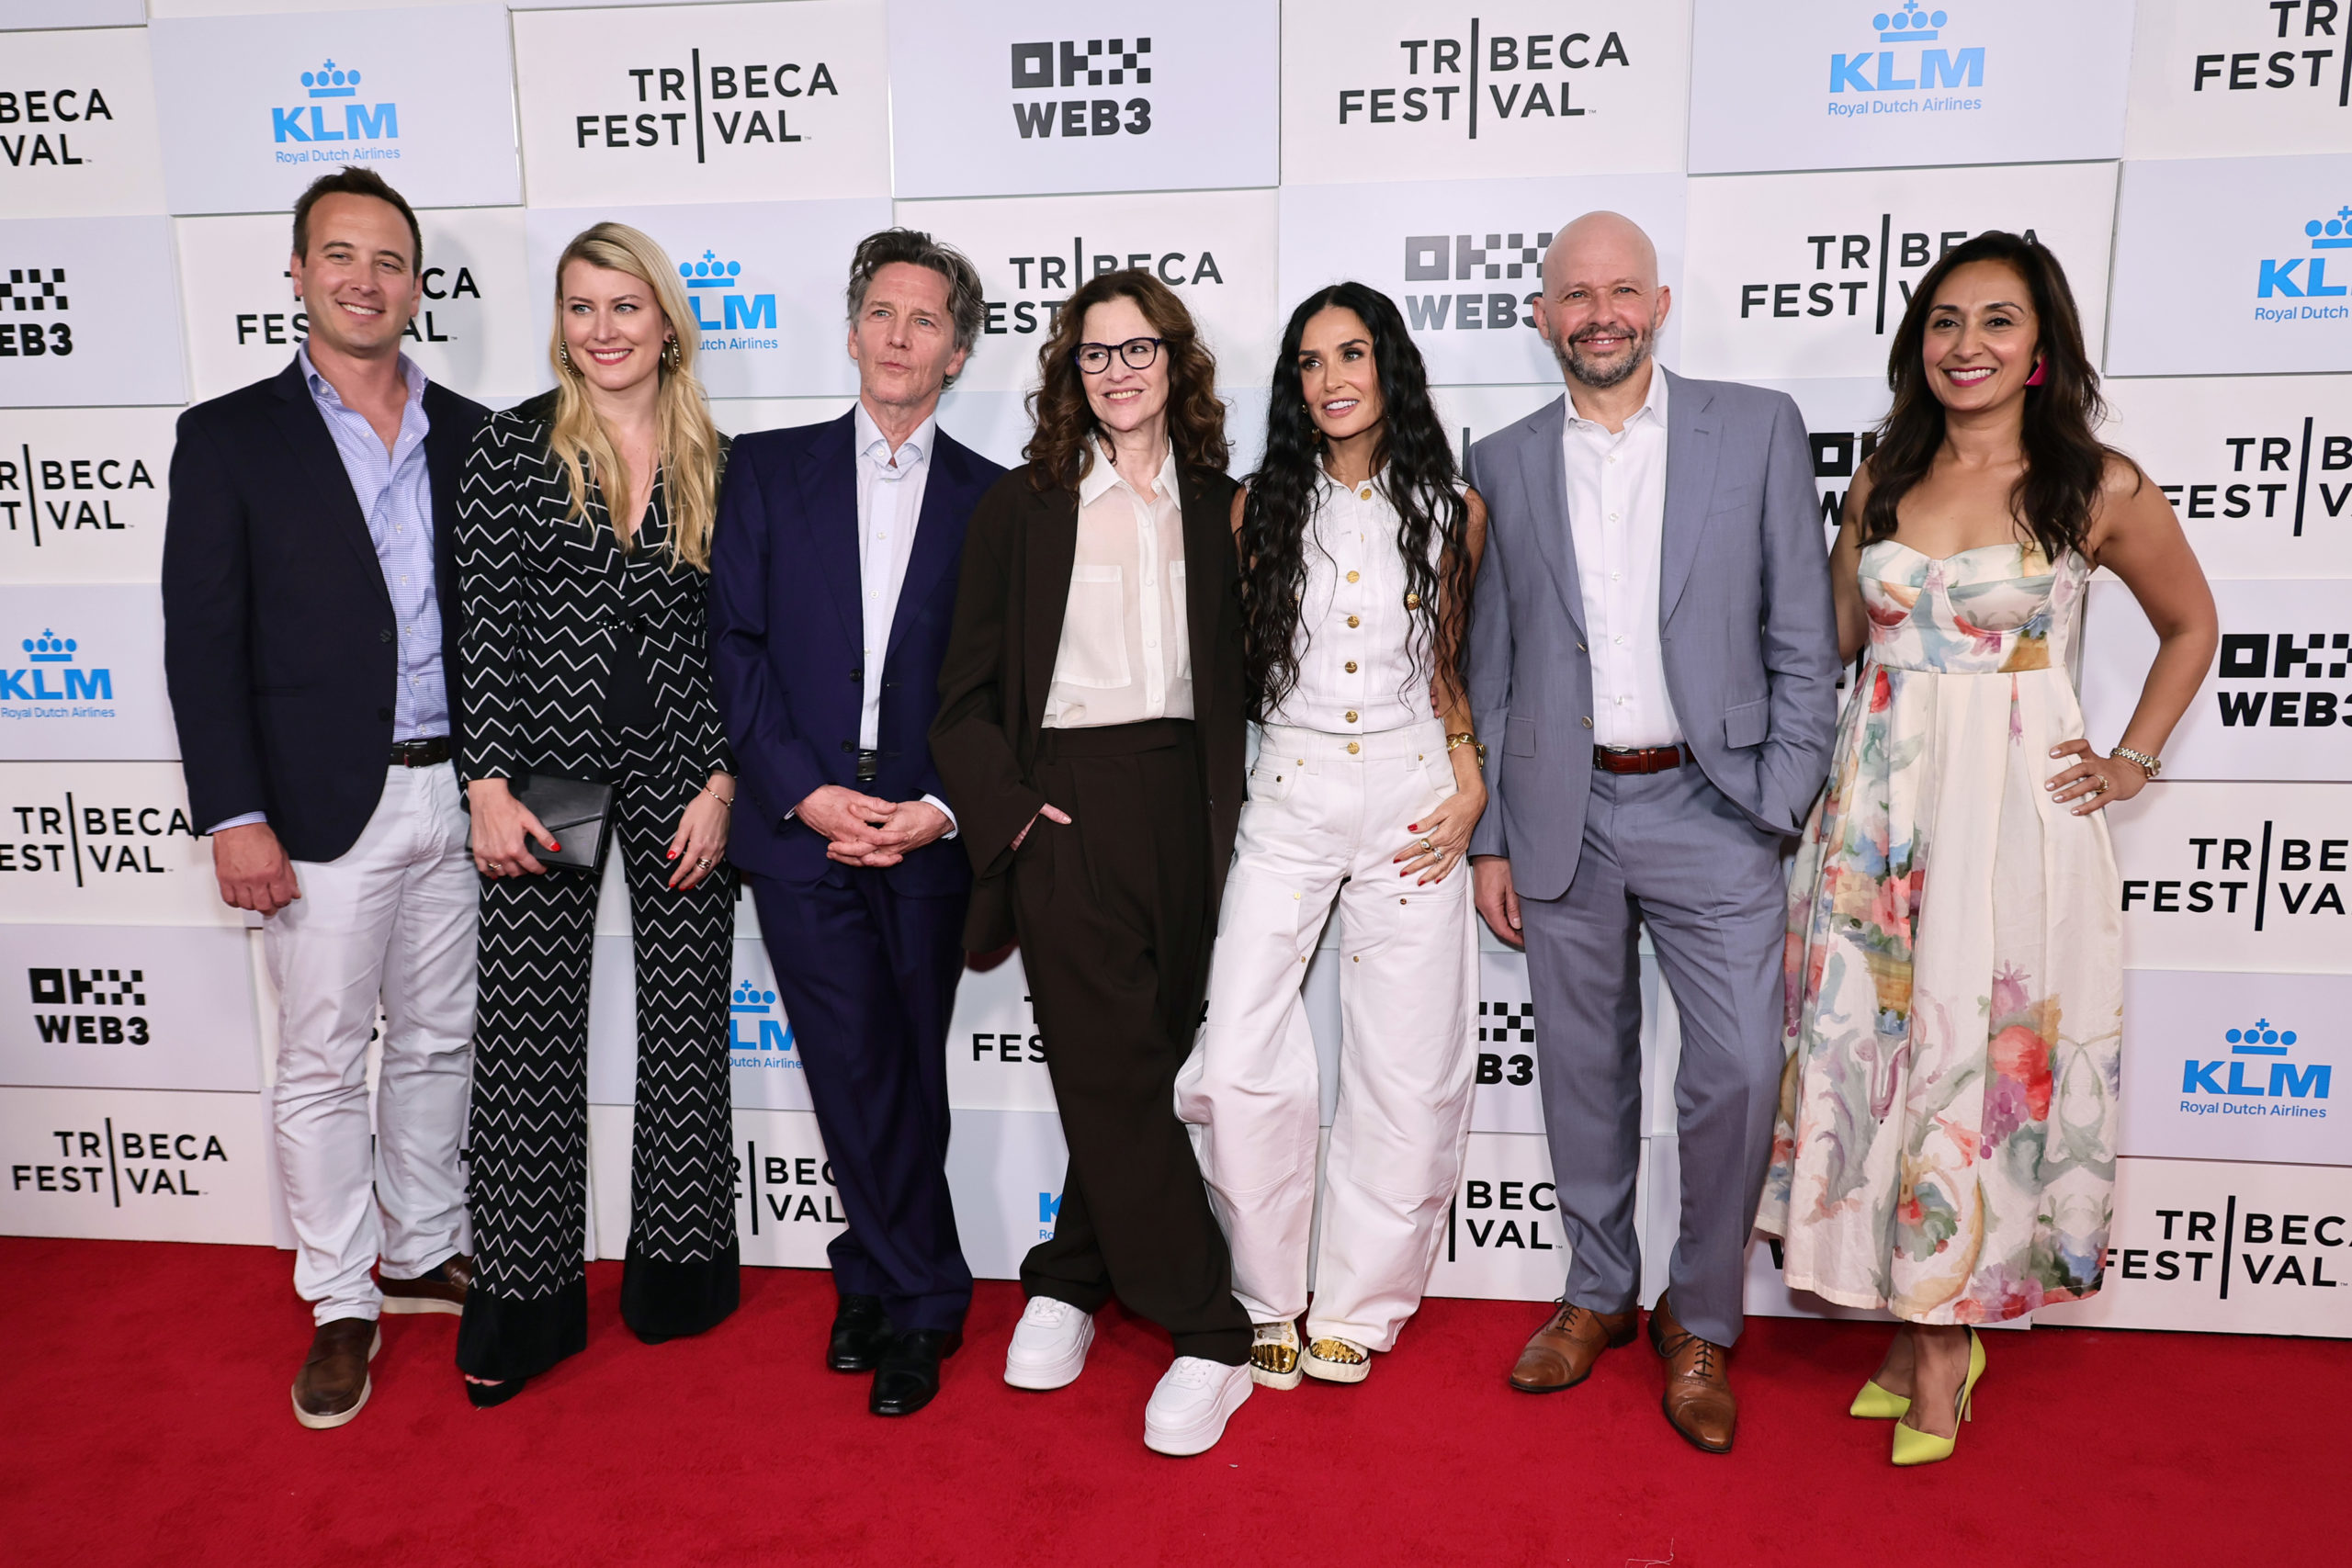 NEW YORK, NEW YORK - JUNE 07: (L-R) Mike Kelley, Victoria Thompson, Andrew McCarthy, Ally Sheedy, Demi Moore, Jon Cryer and Reena Mehta attend the "BRATS" premiere during the 2024 Tribeca Festival at BMCC Theater on June 07, 2024 in New York City. (Photo by Theo Wargo/Getty Images for Tribeca Festival)